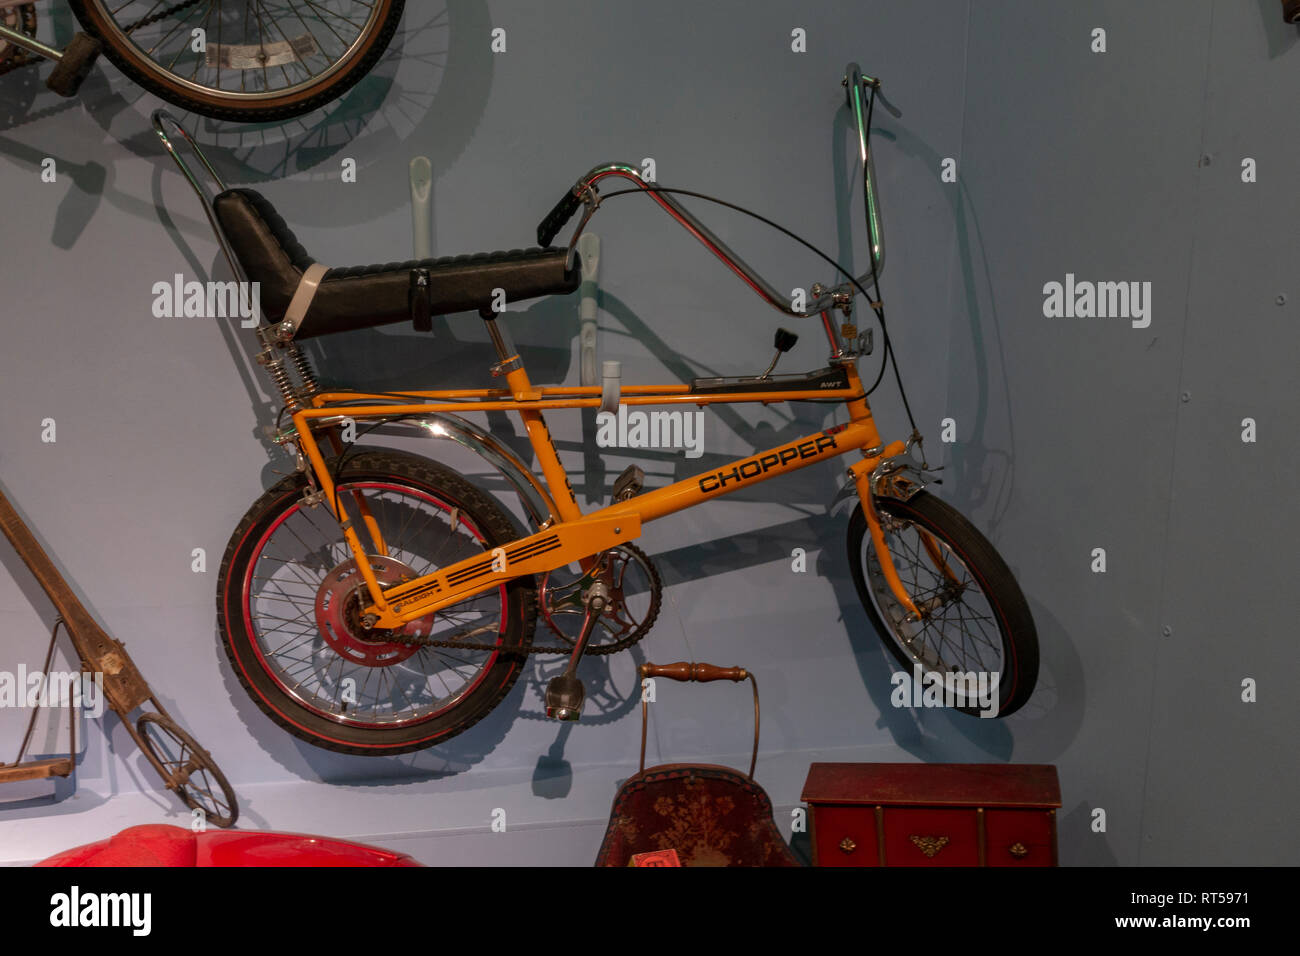 A Raleigh Chopper, a children's bicycle from the 1970s in Britain, York Castle Museum, York, Yorkshire, UK. Stock Photo